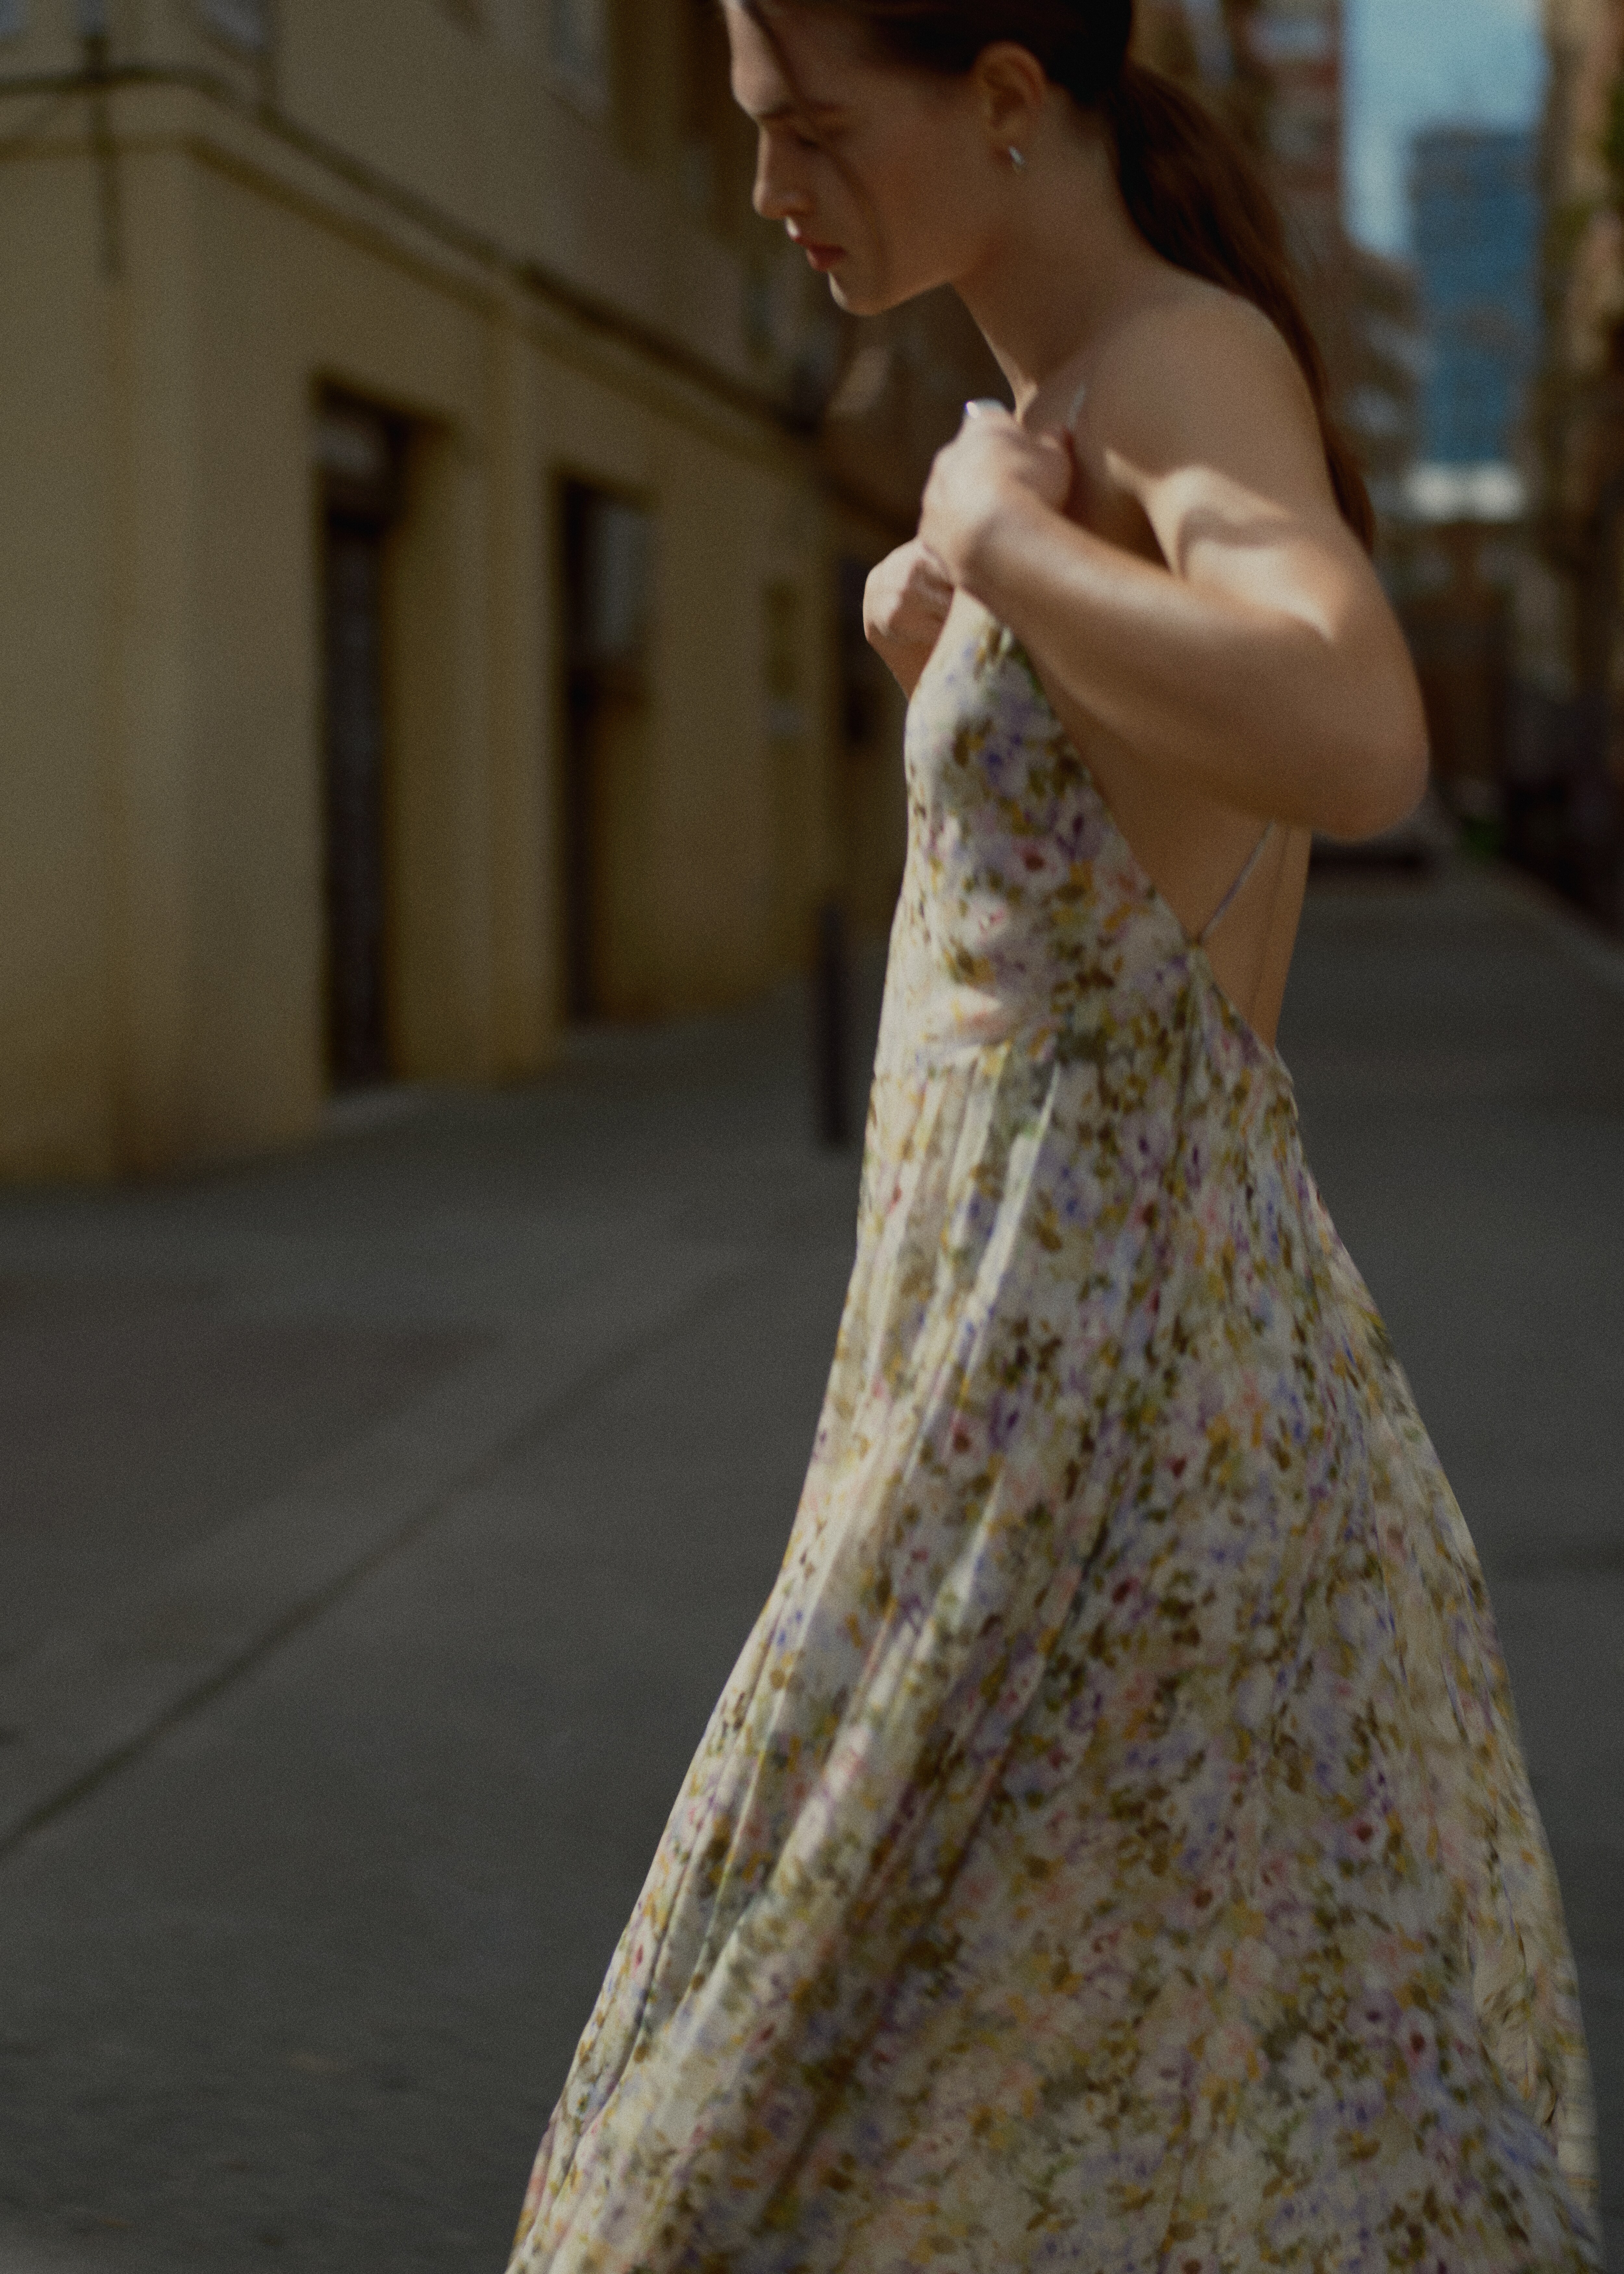 Pleated floral dress - Details of the article 6